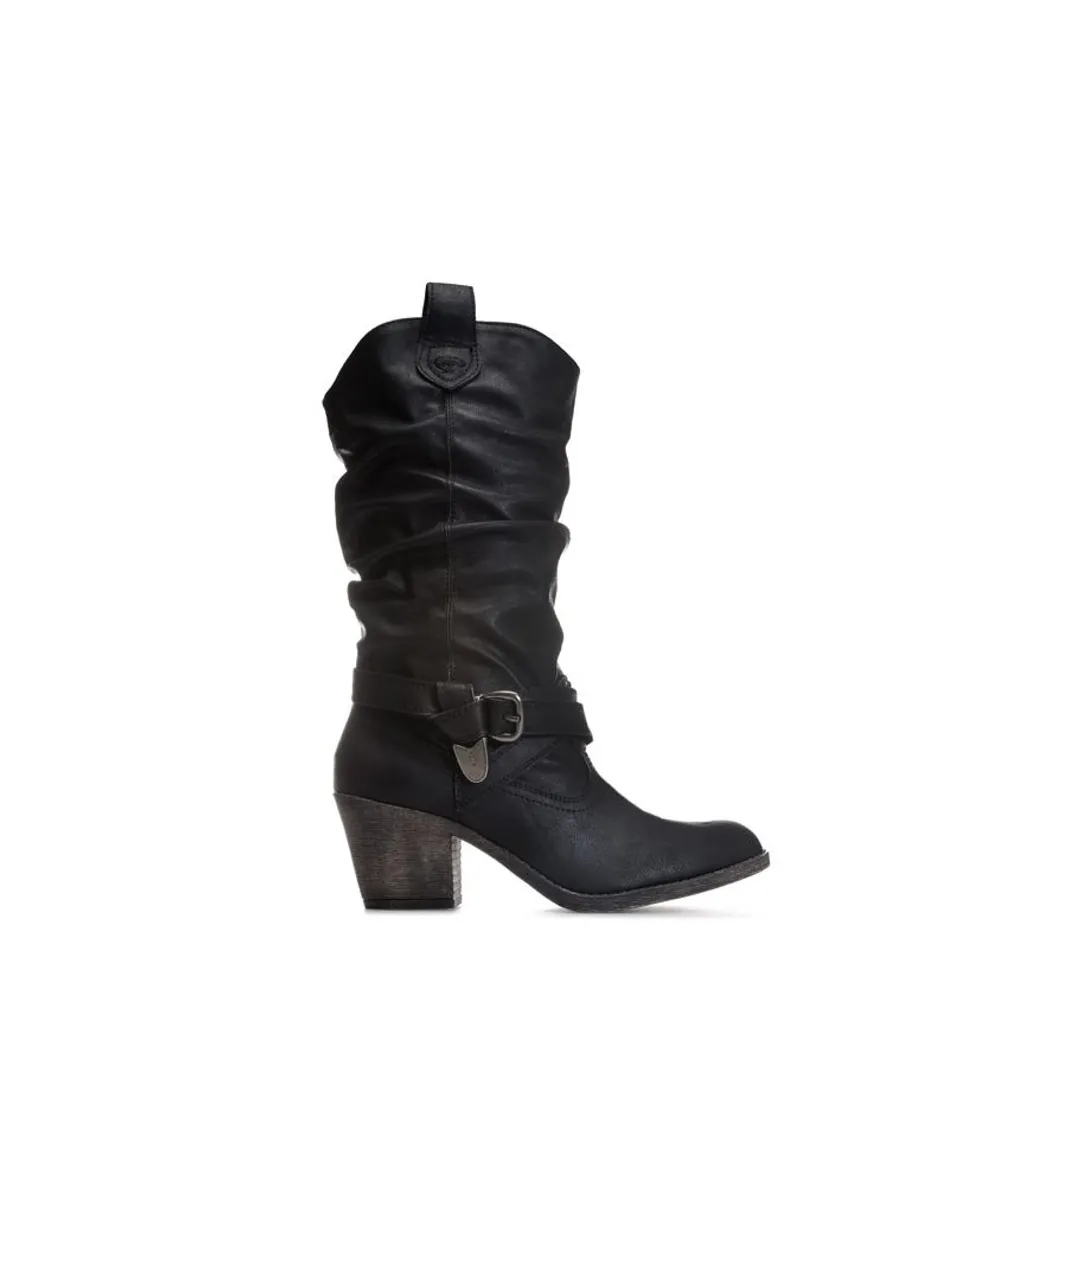 Rocket Dog Womenss Sidestep Lewis Boots in Black